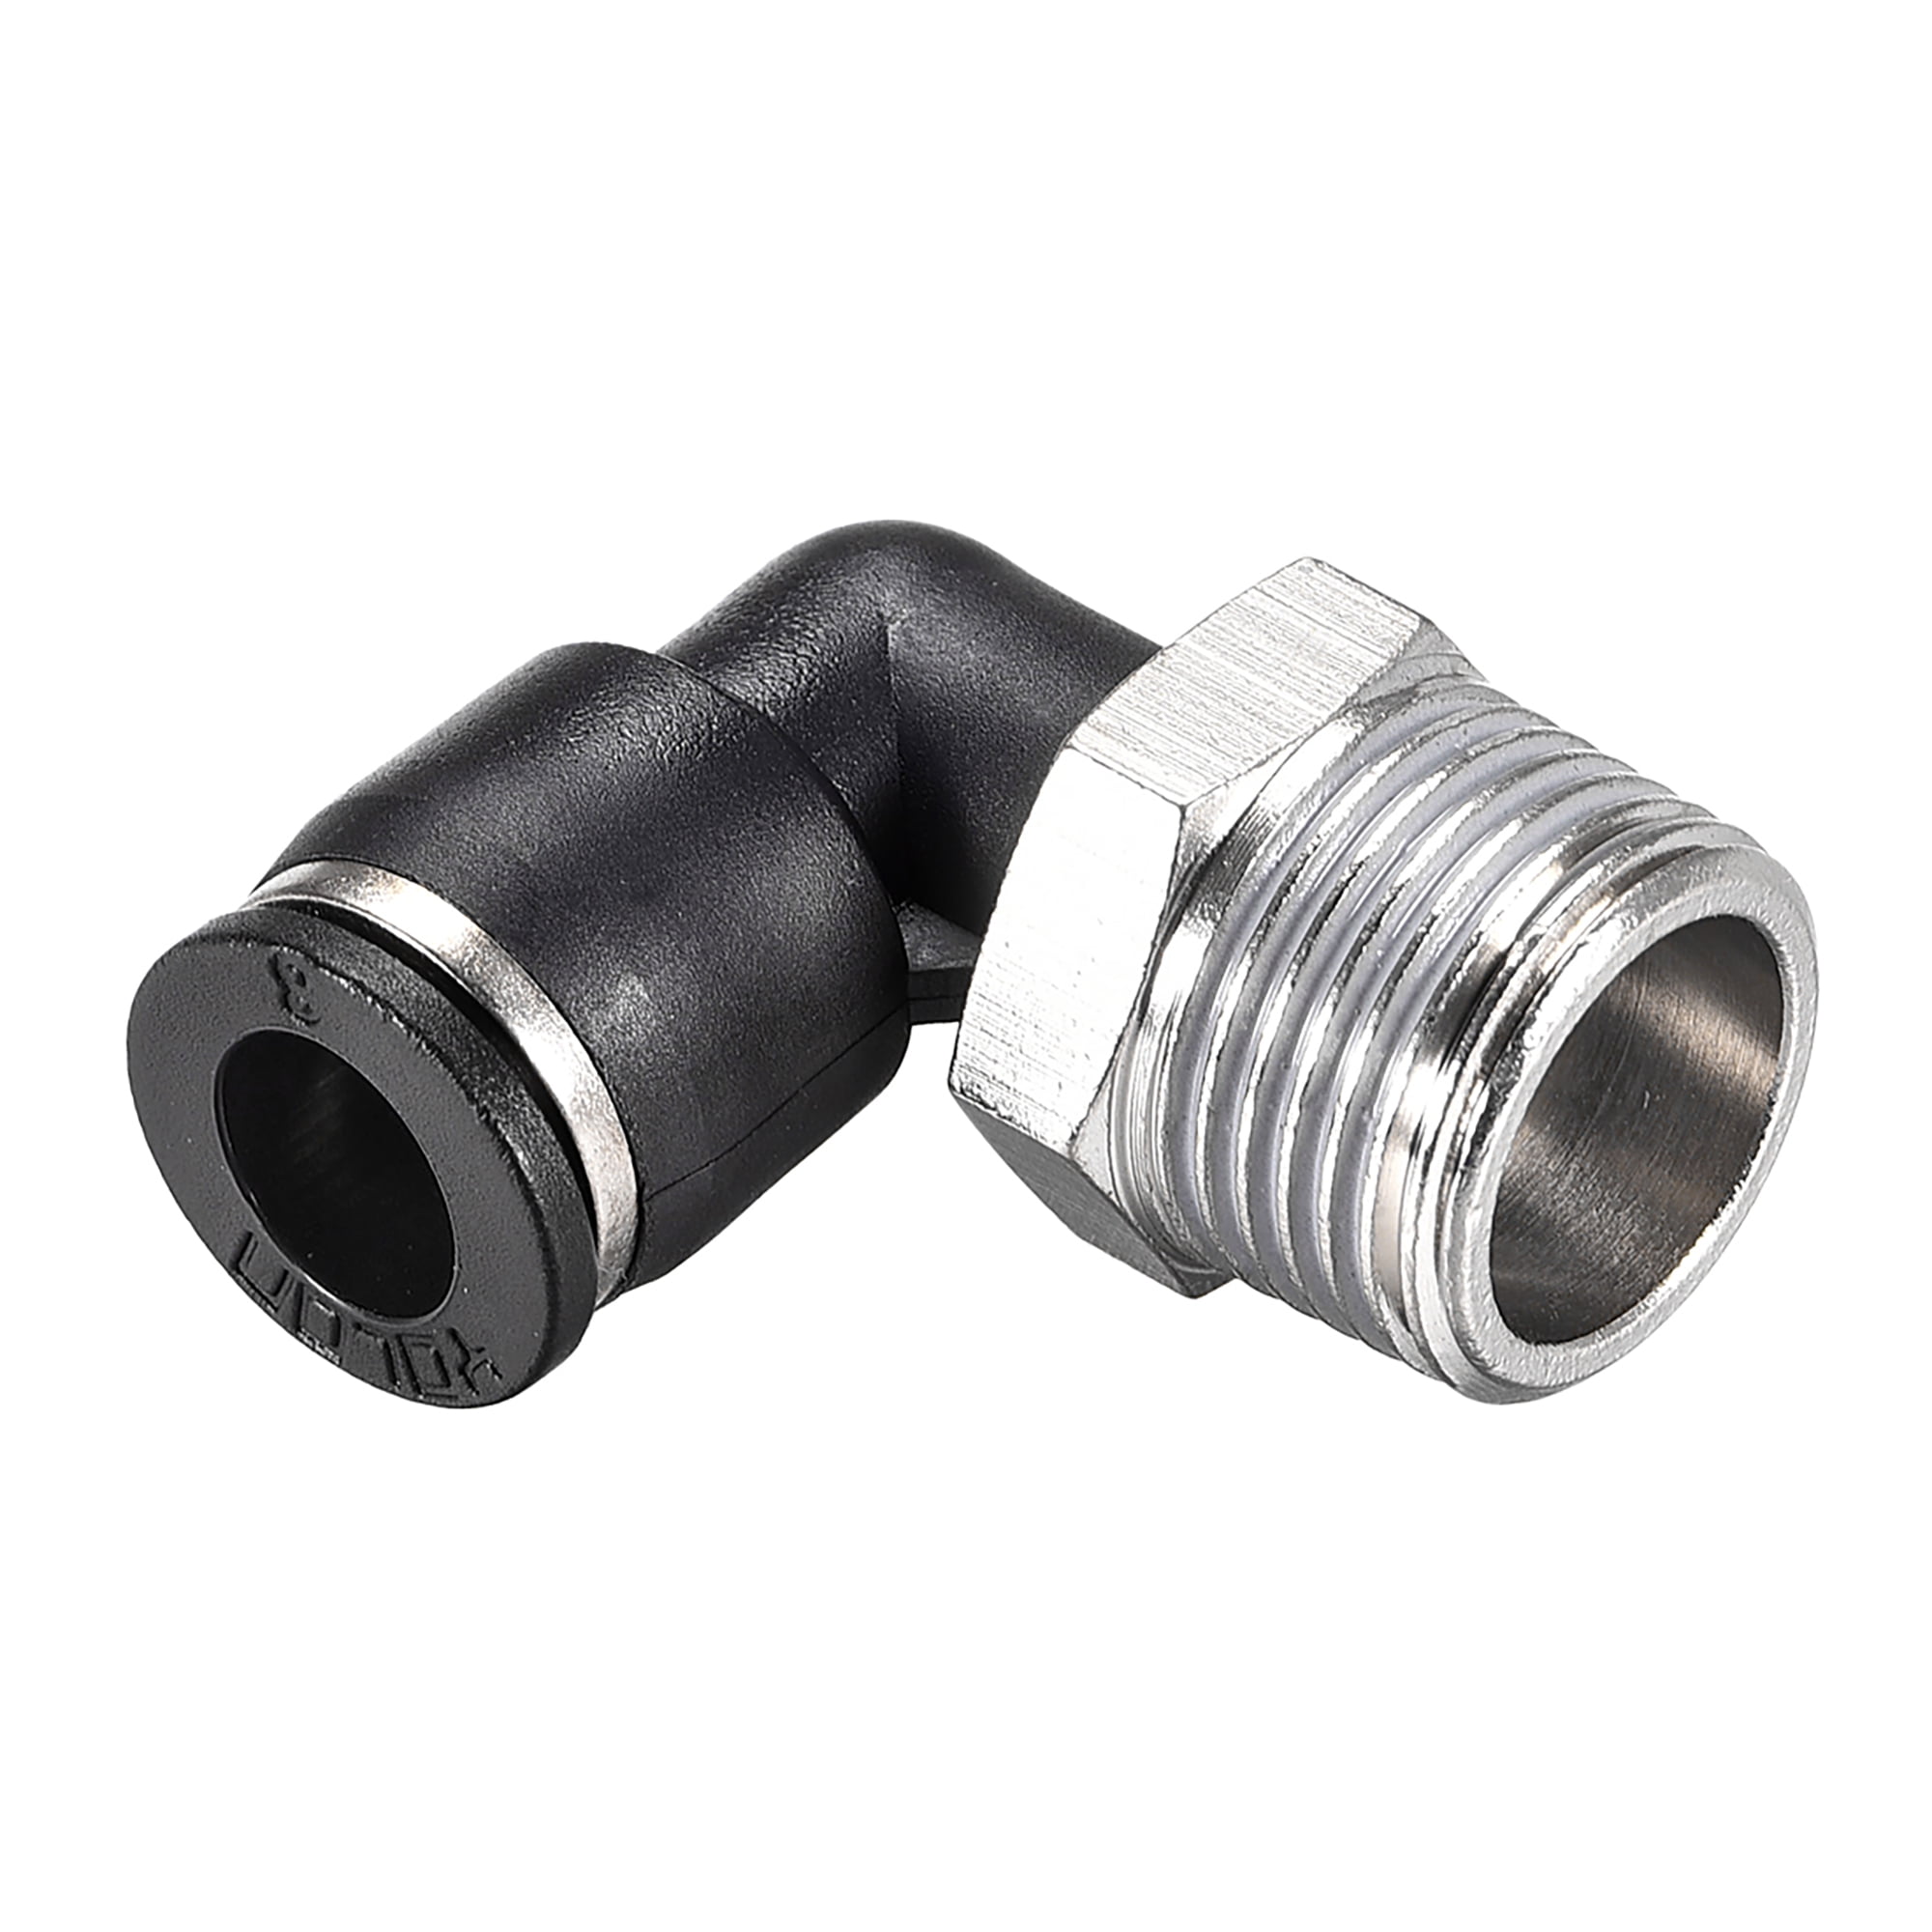 HHIP 8401-0300 Push to Connect Male Pneumatic Elbow Tube Fittings 1/4 X 3/8 NPT 